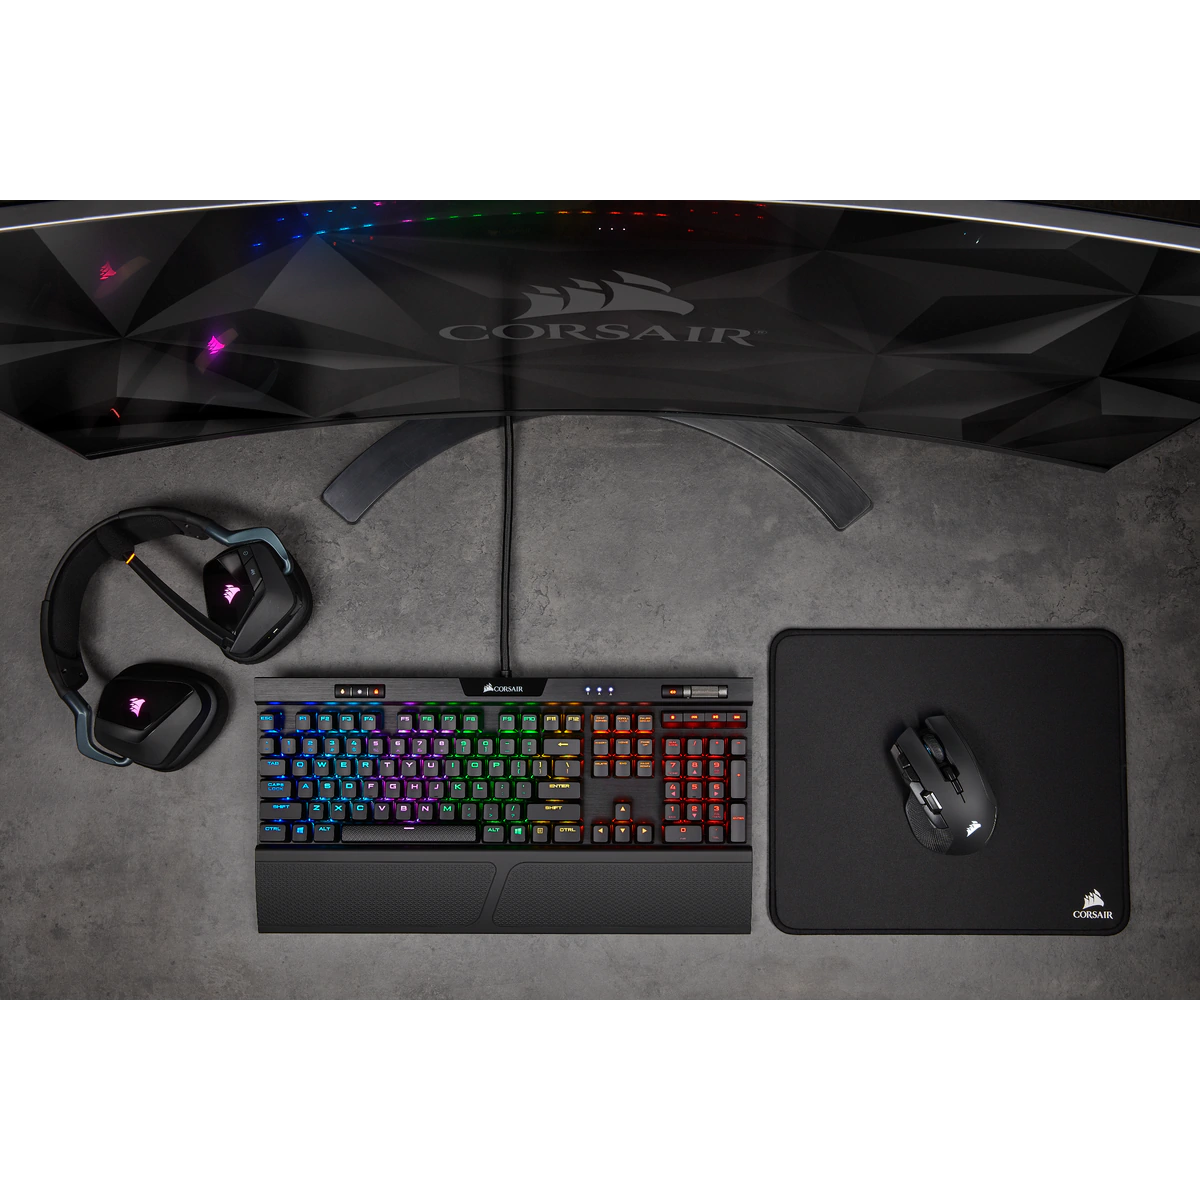 Mouse Gamer Corsair Ironclaw RGB Wireless Slipstream, (Bluetooth + USB receptor + Cable USB)